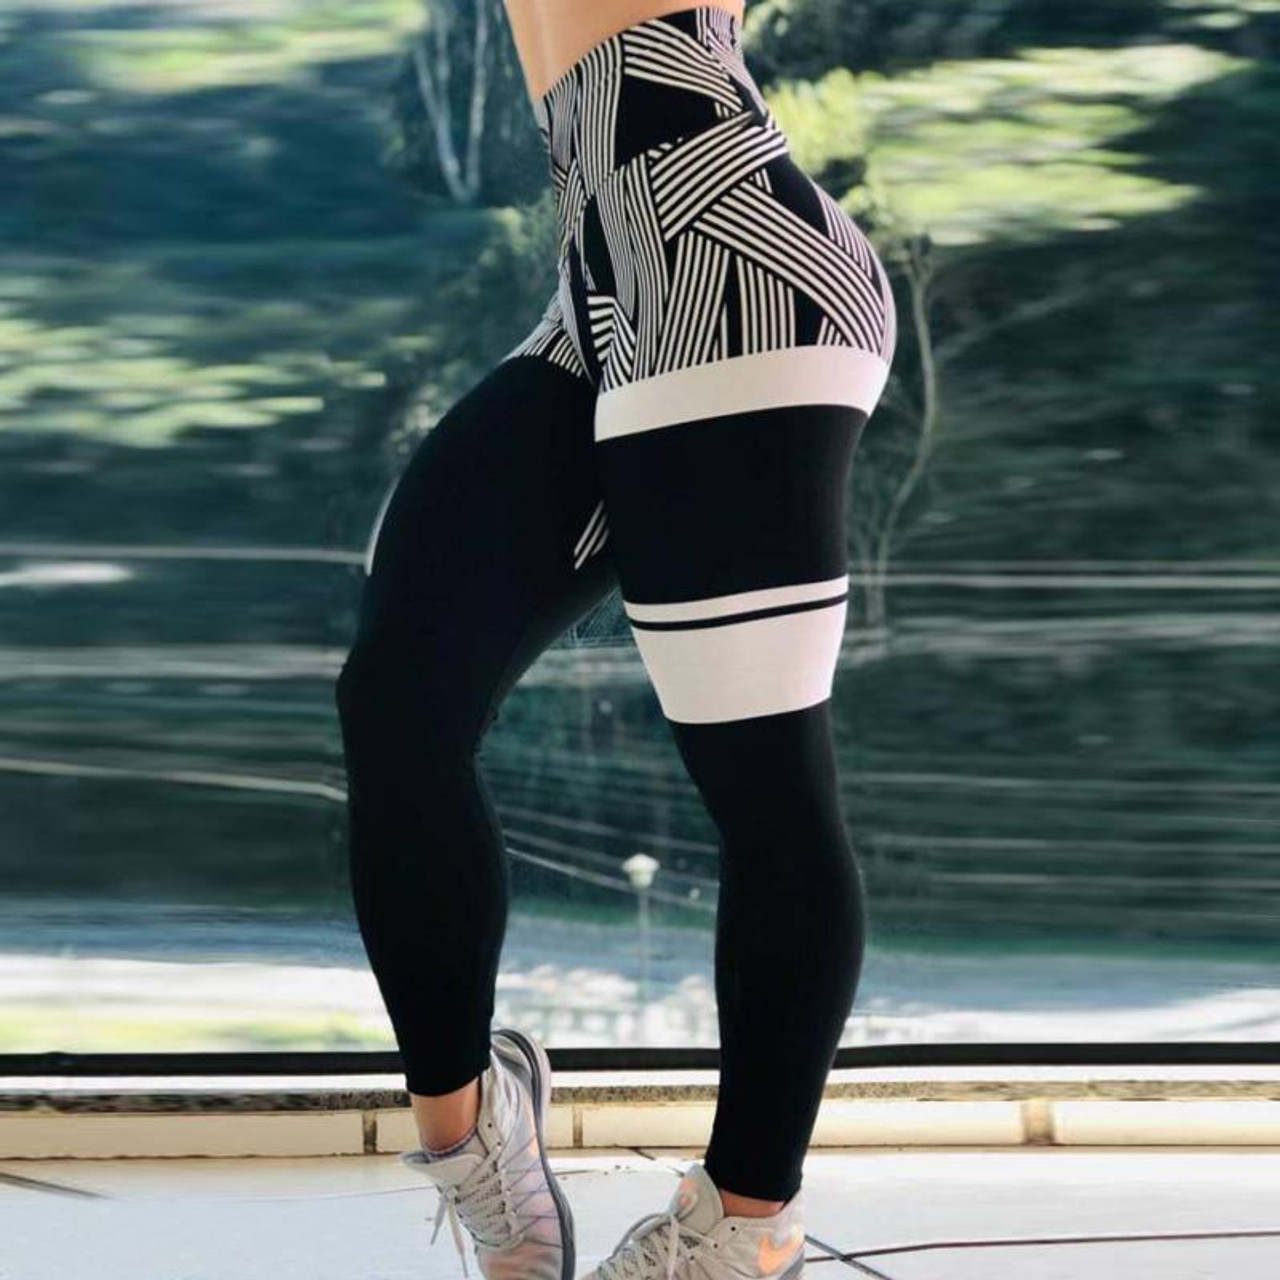 High Waist 3D Printed Spandex High Waisted Workout Leggings For Women  Fashionable Push Up Workout Pants Y200113 From Top_clothing666, $26.14 |  DHgate.Com